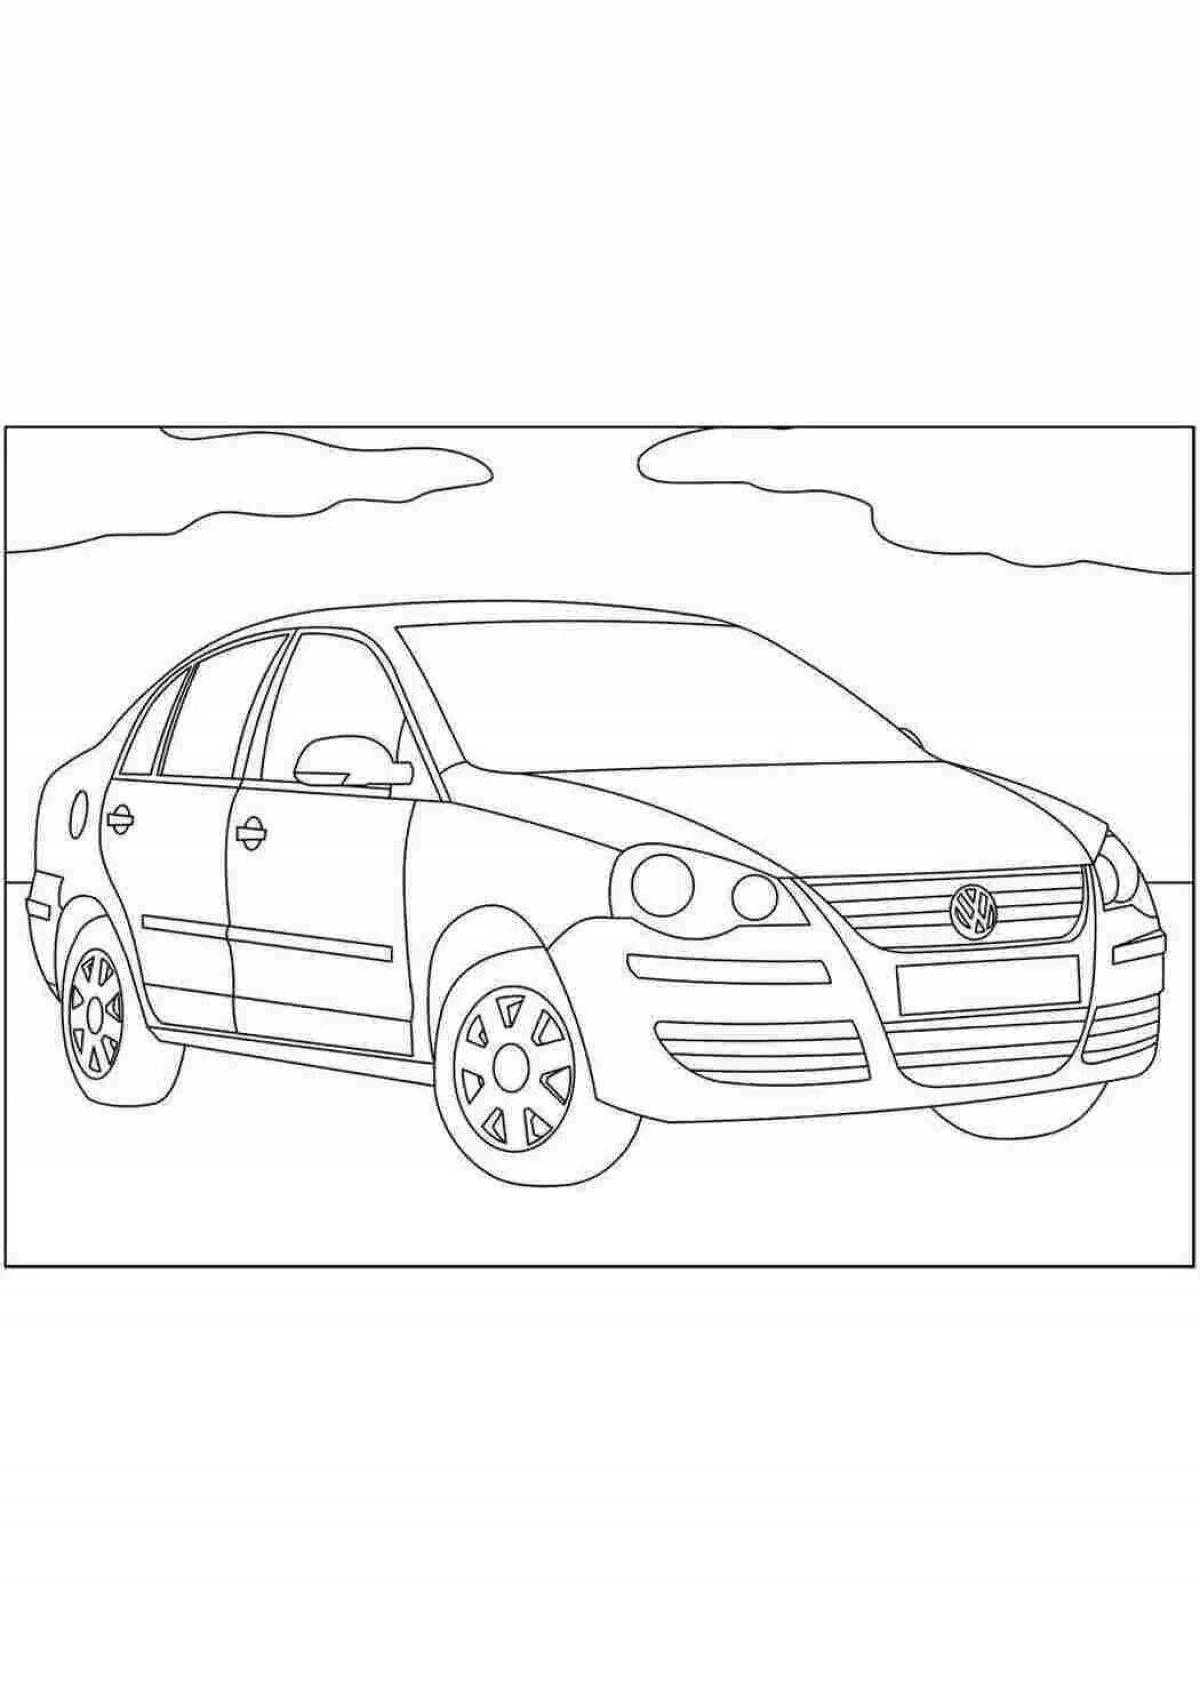 Colouring cute volkswagen cars